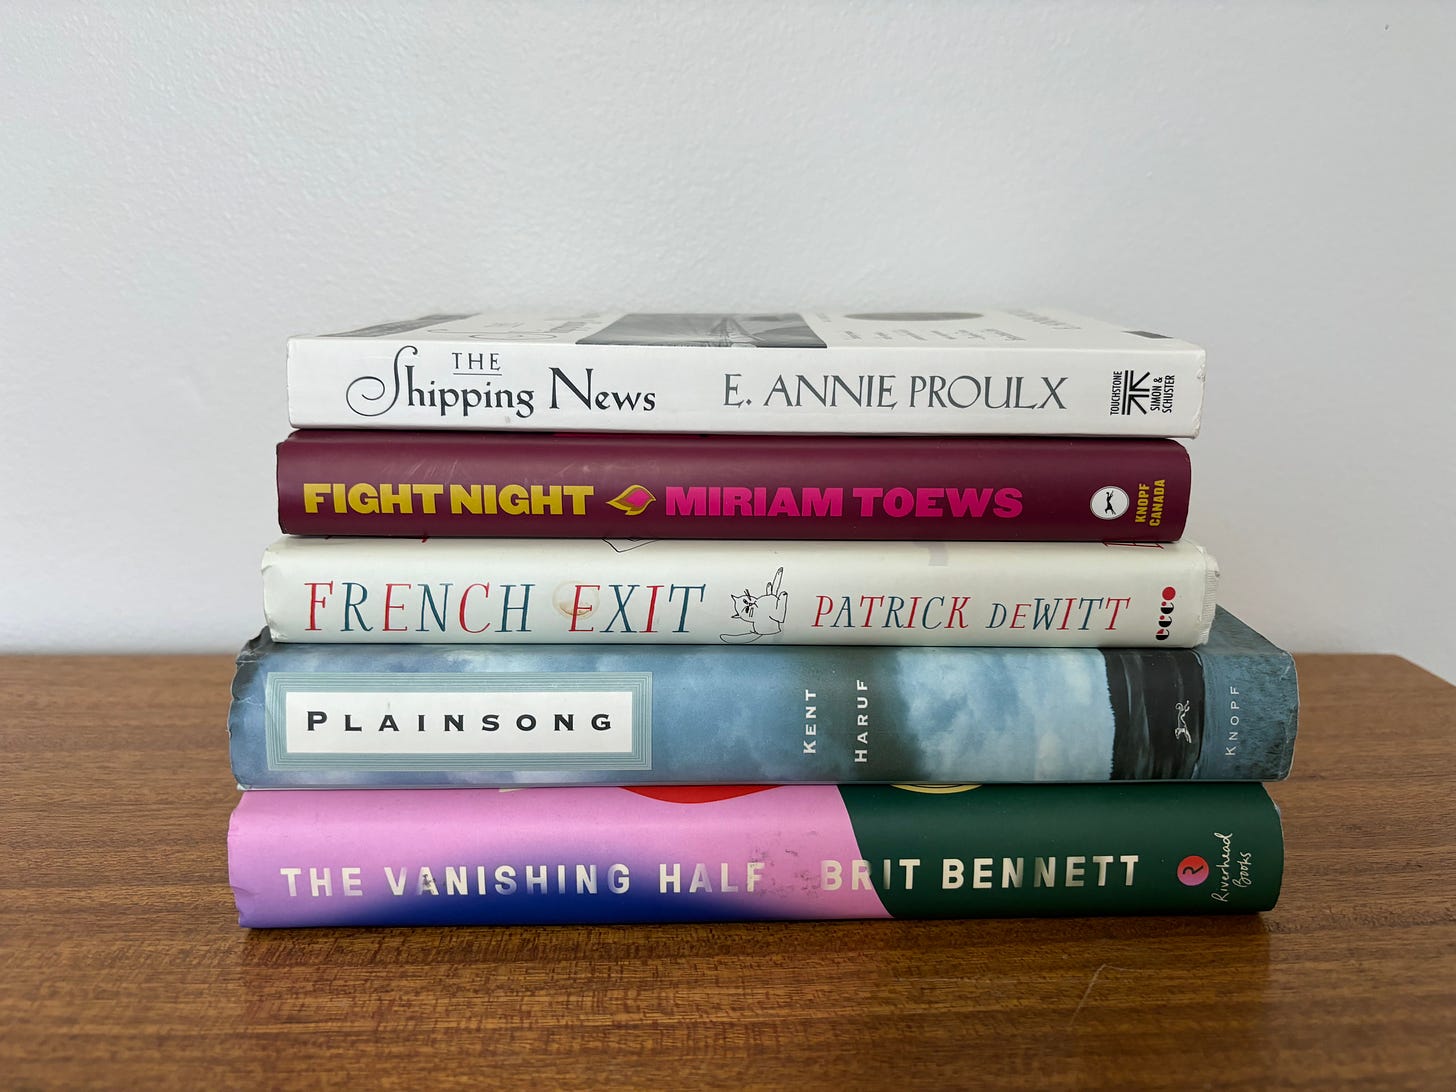 Bookstack: The Shipping News by E. Annie Proulx, Fight Night by Miriam Toews, French Exit by Patrick DeWitt, Plainsong by Kent Harry, and The Vanishing Half by Brit Bennet